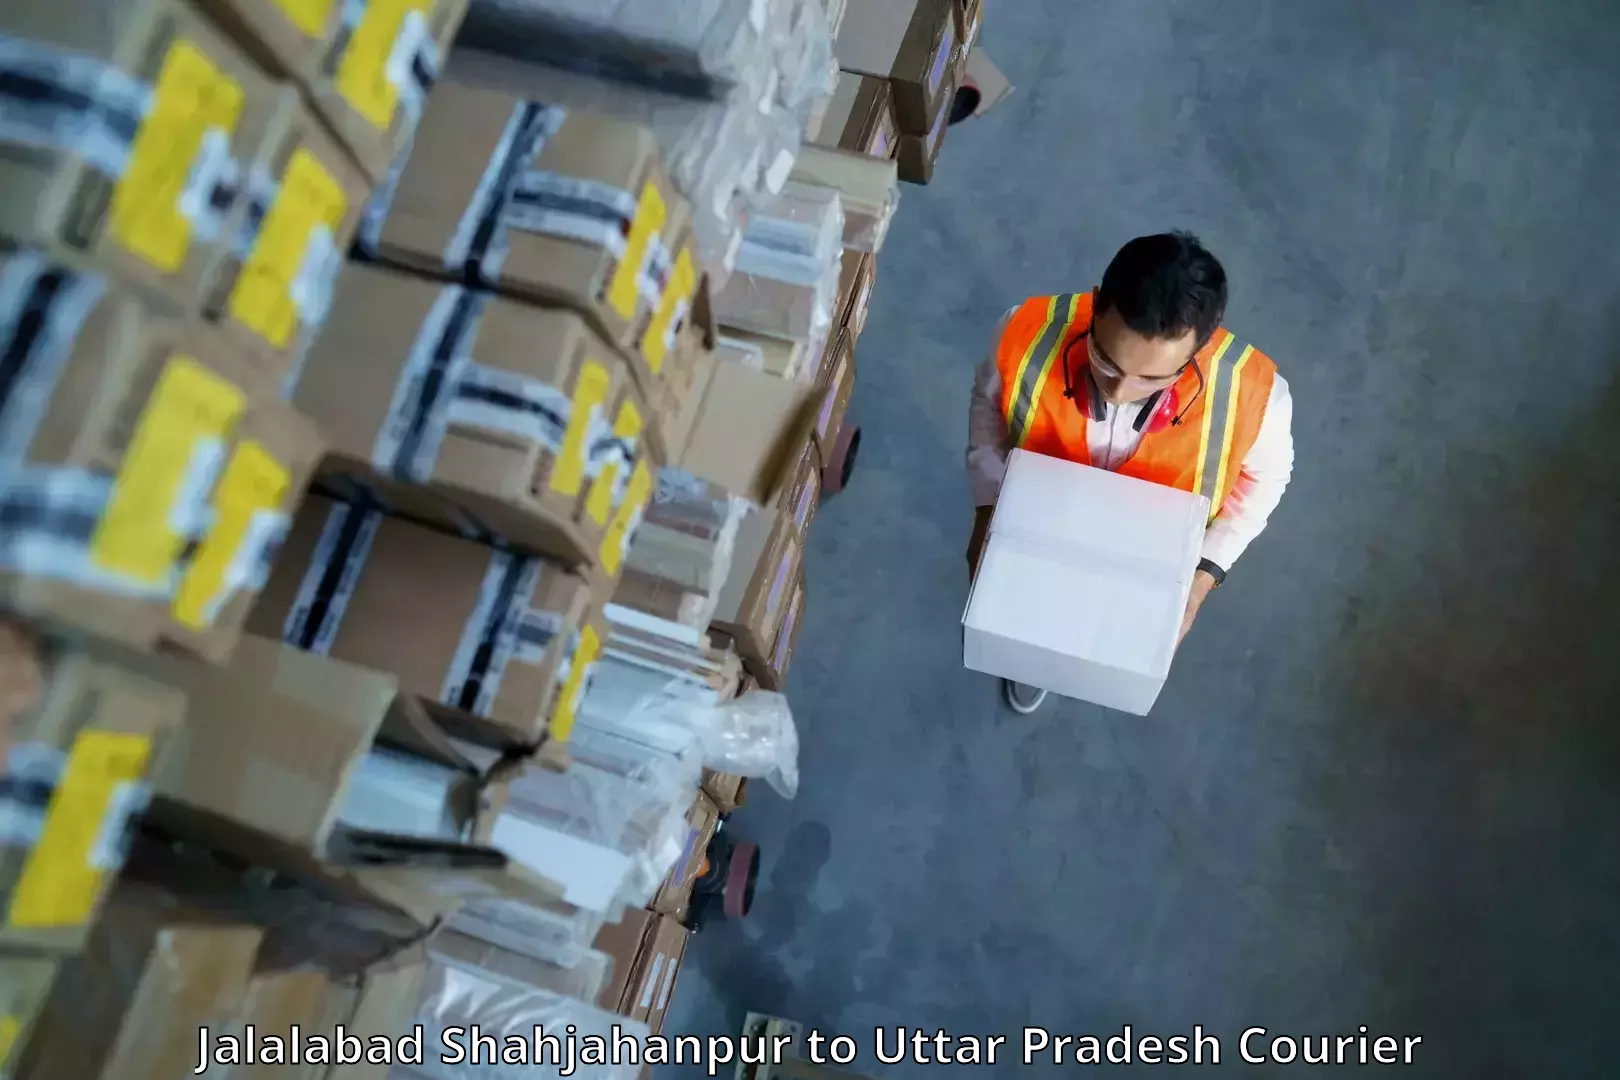 Courier dispatch services in Jalalabad Shahjahanpur to Dibai